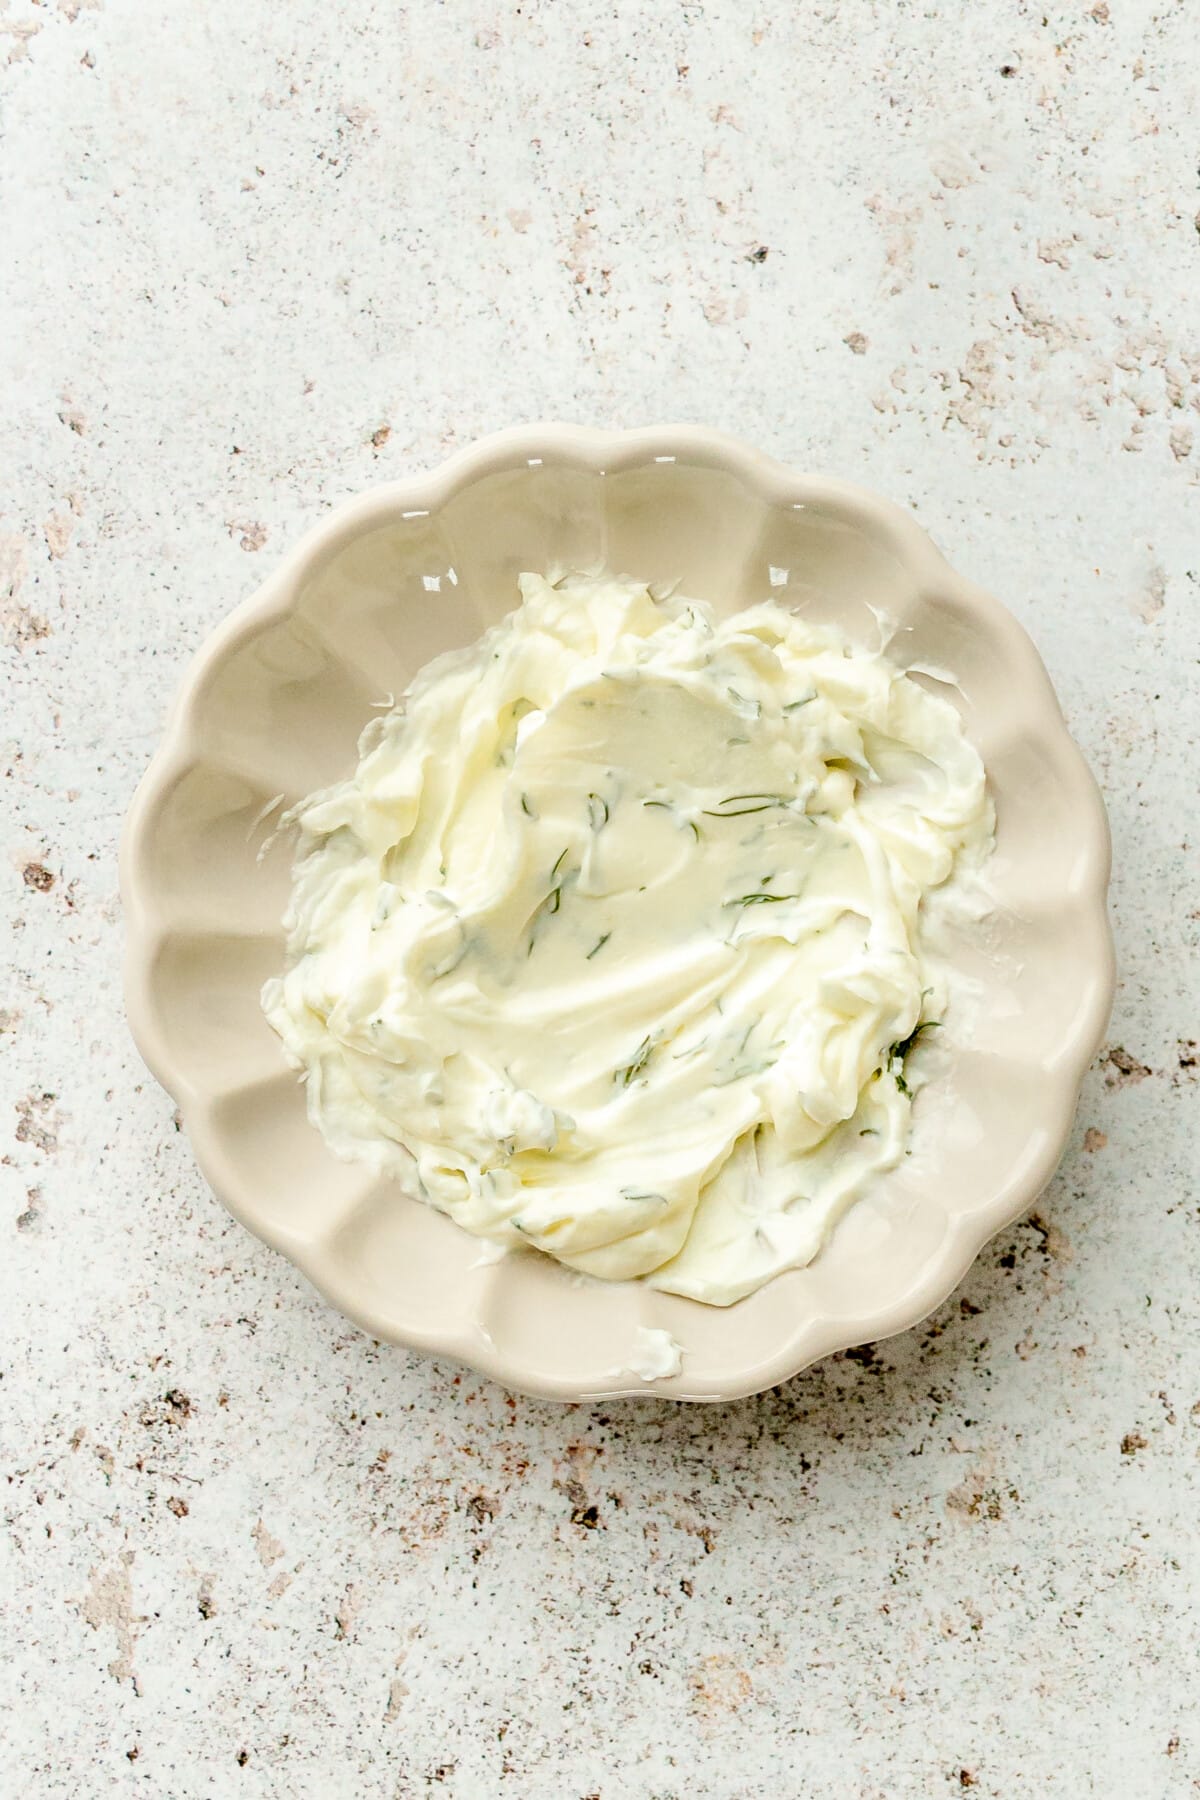 A dill cream cheese mixture sits on a small ceramic plate on a light grey surface.